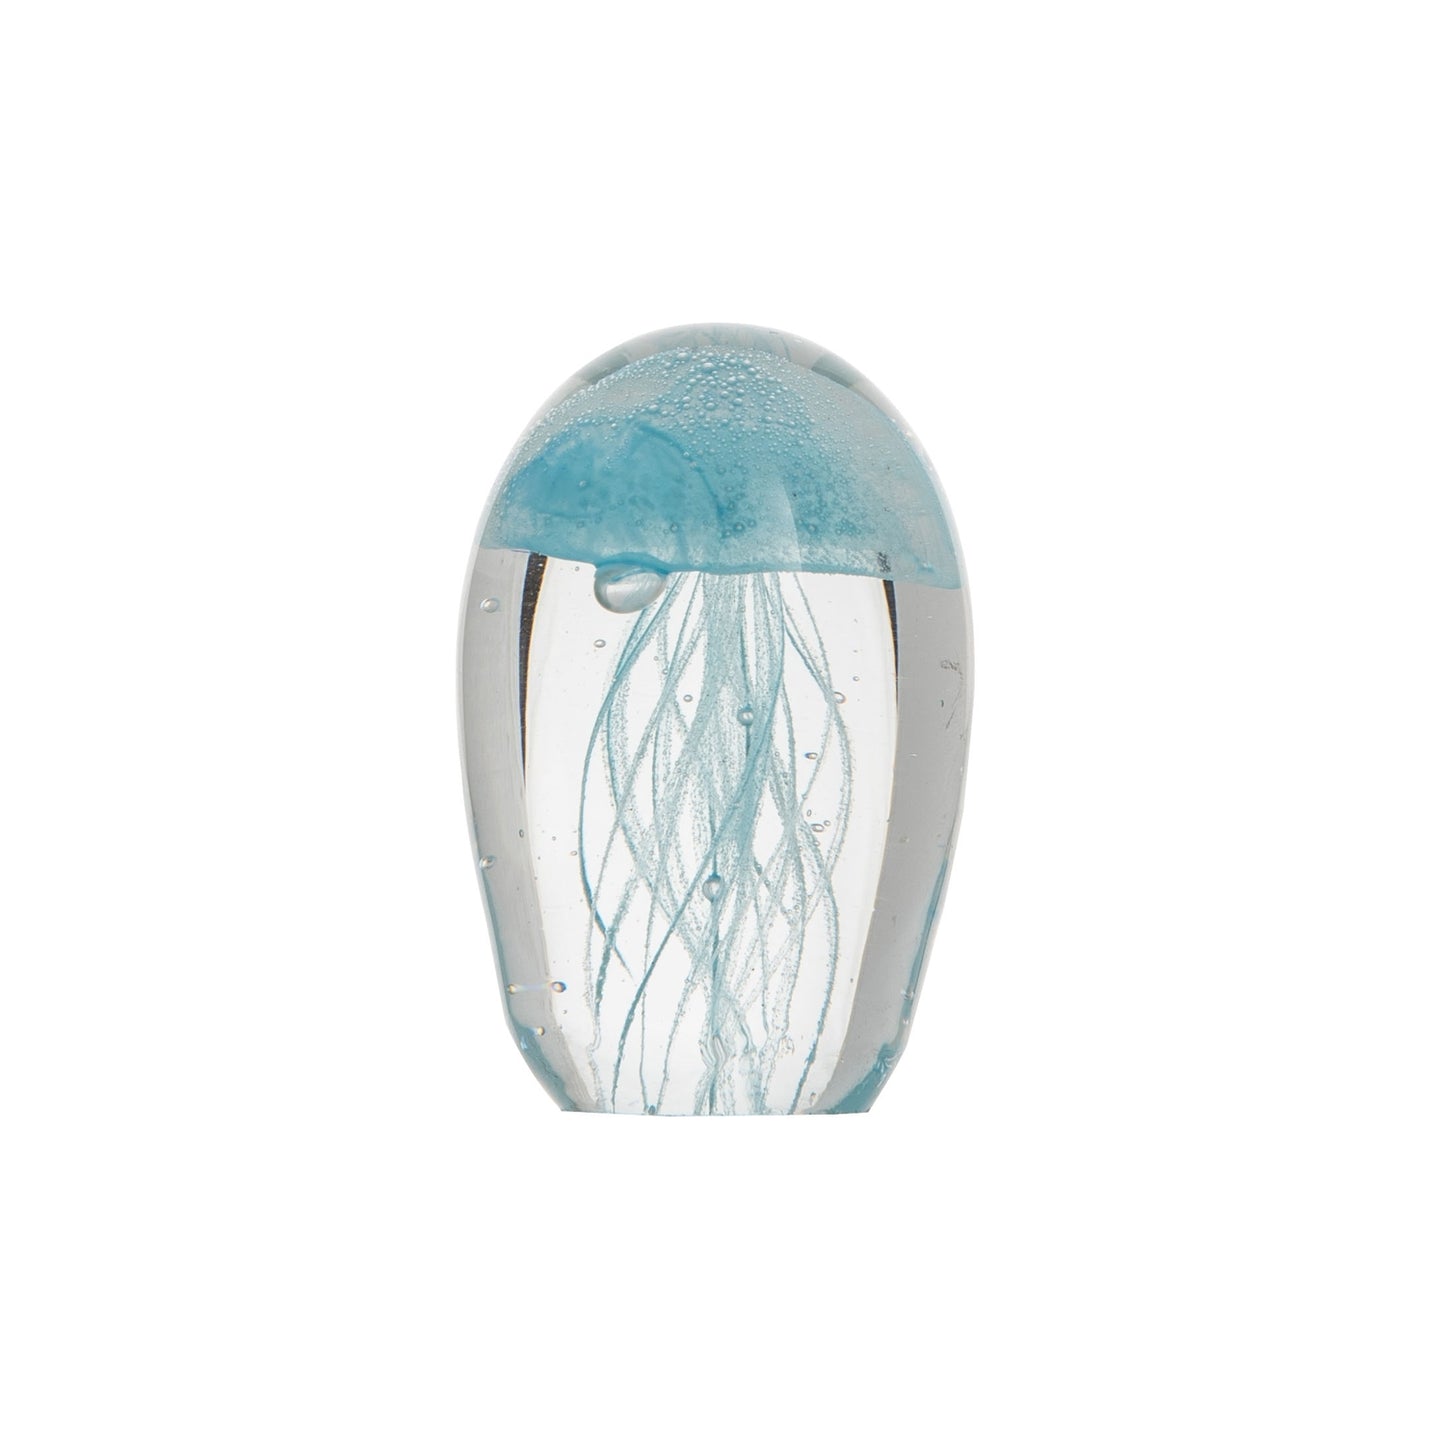 CLEAR JELLYFISH PAPERWEIGHT